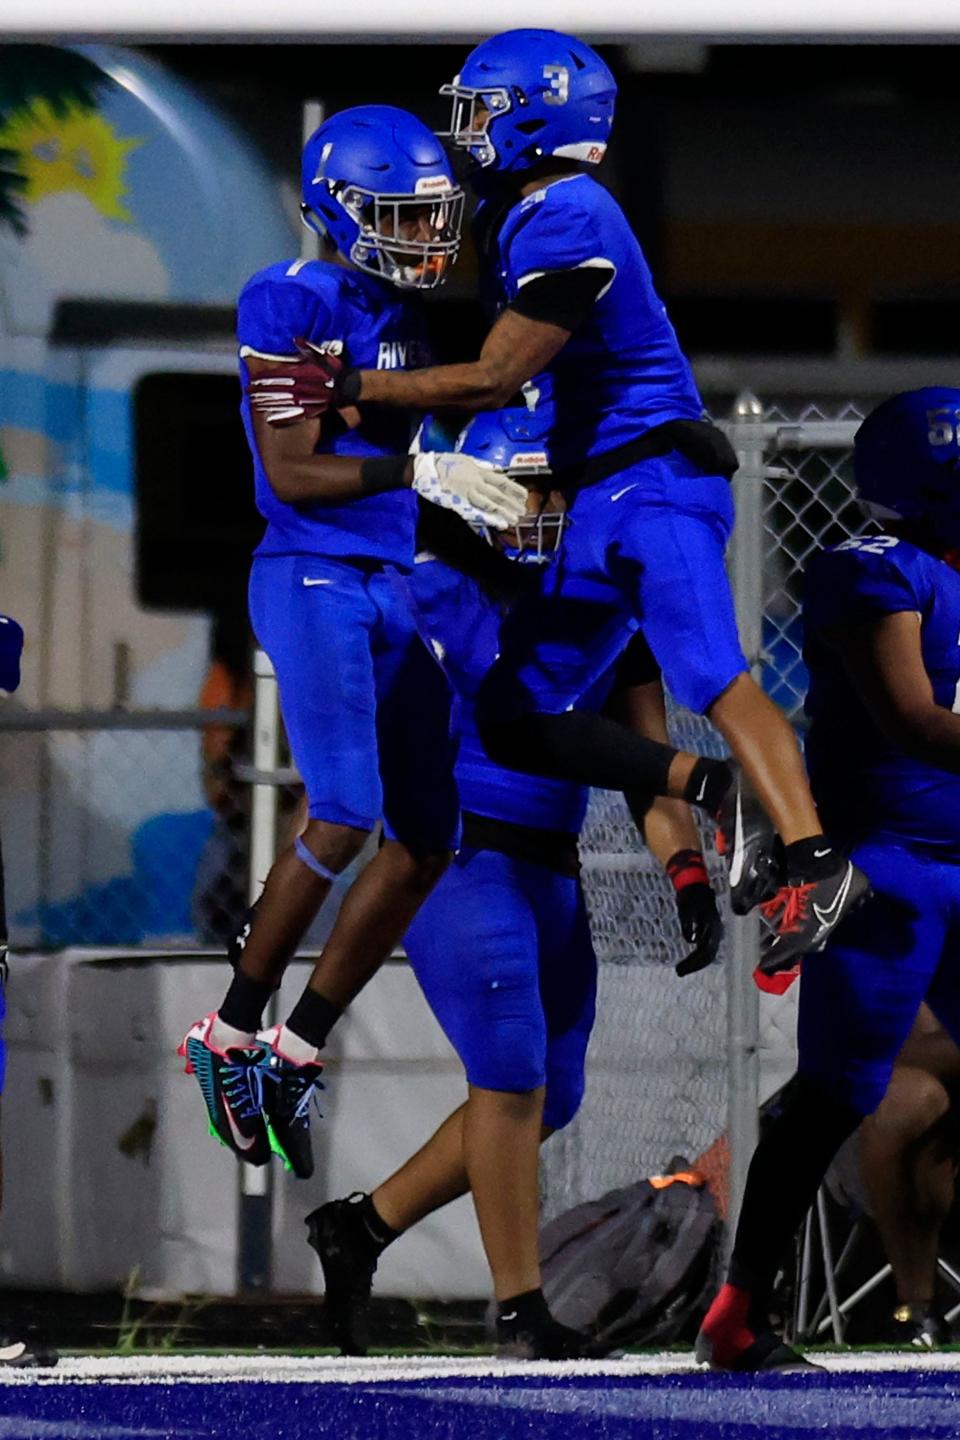 Riverside's Myles Kendrick (1), left, celebrates his touchdown score with Kaiden Morris (3) during the third quarter of a high school football matchup Friday, Sept. 22, 2023 at Riverside High School in Jacksonville, Fla. The Riverside Generals defeated the Ed White Commanders 32-20.